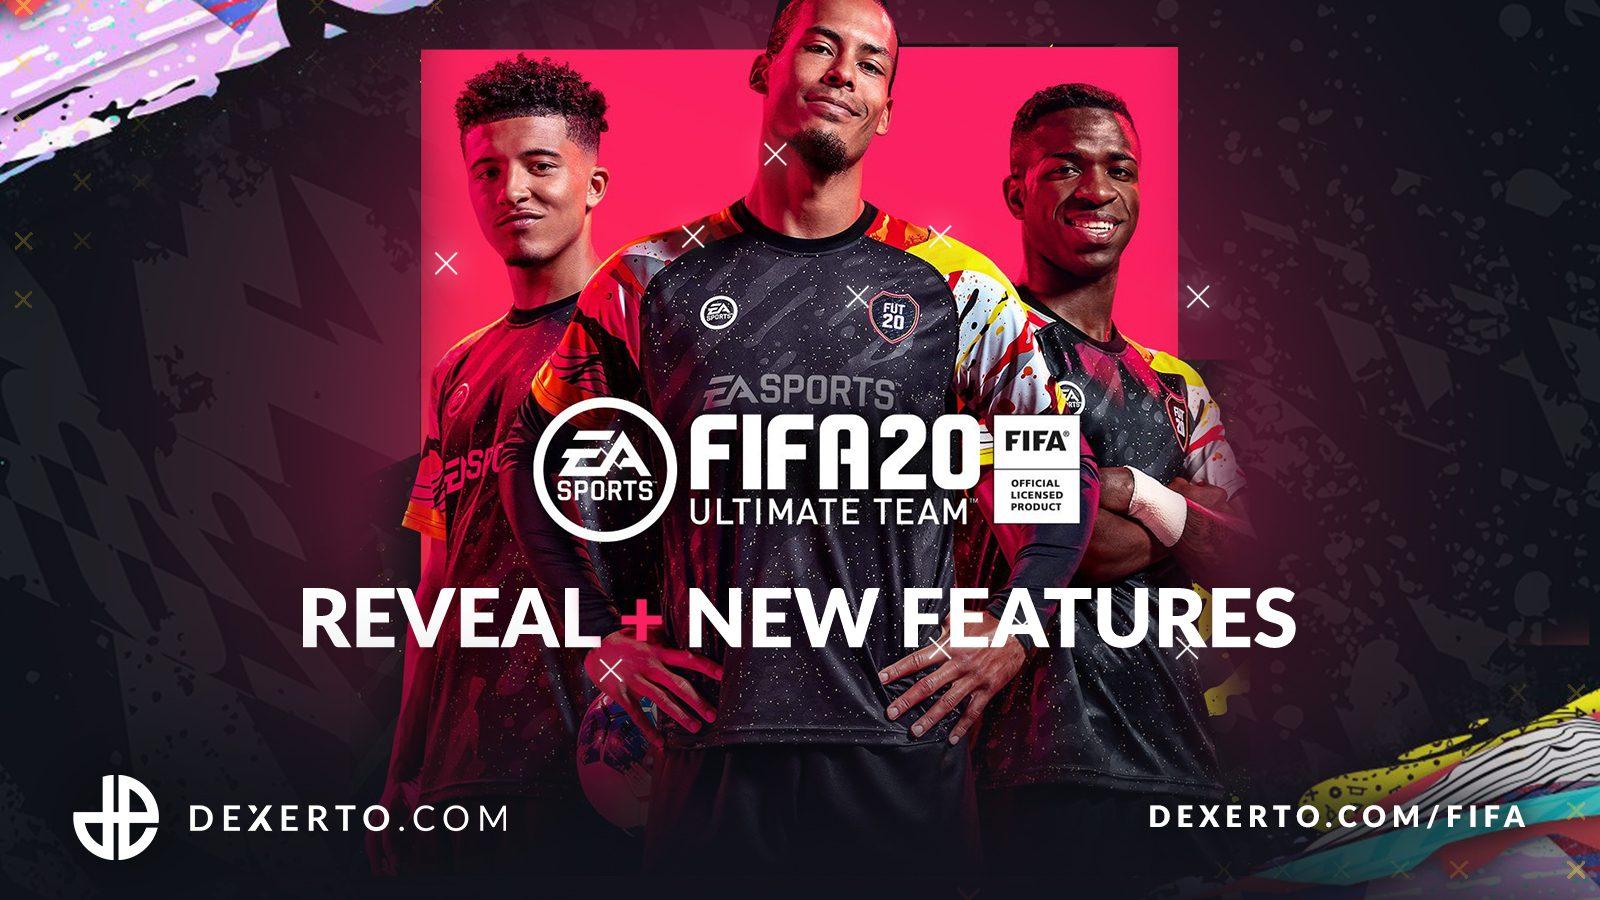 FIFA 20 Ultimate Team Reveal. FUT 20 News & New Features